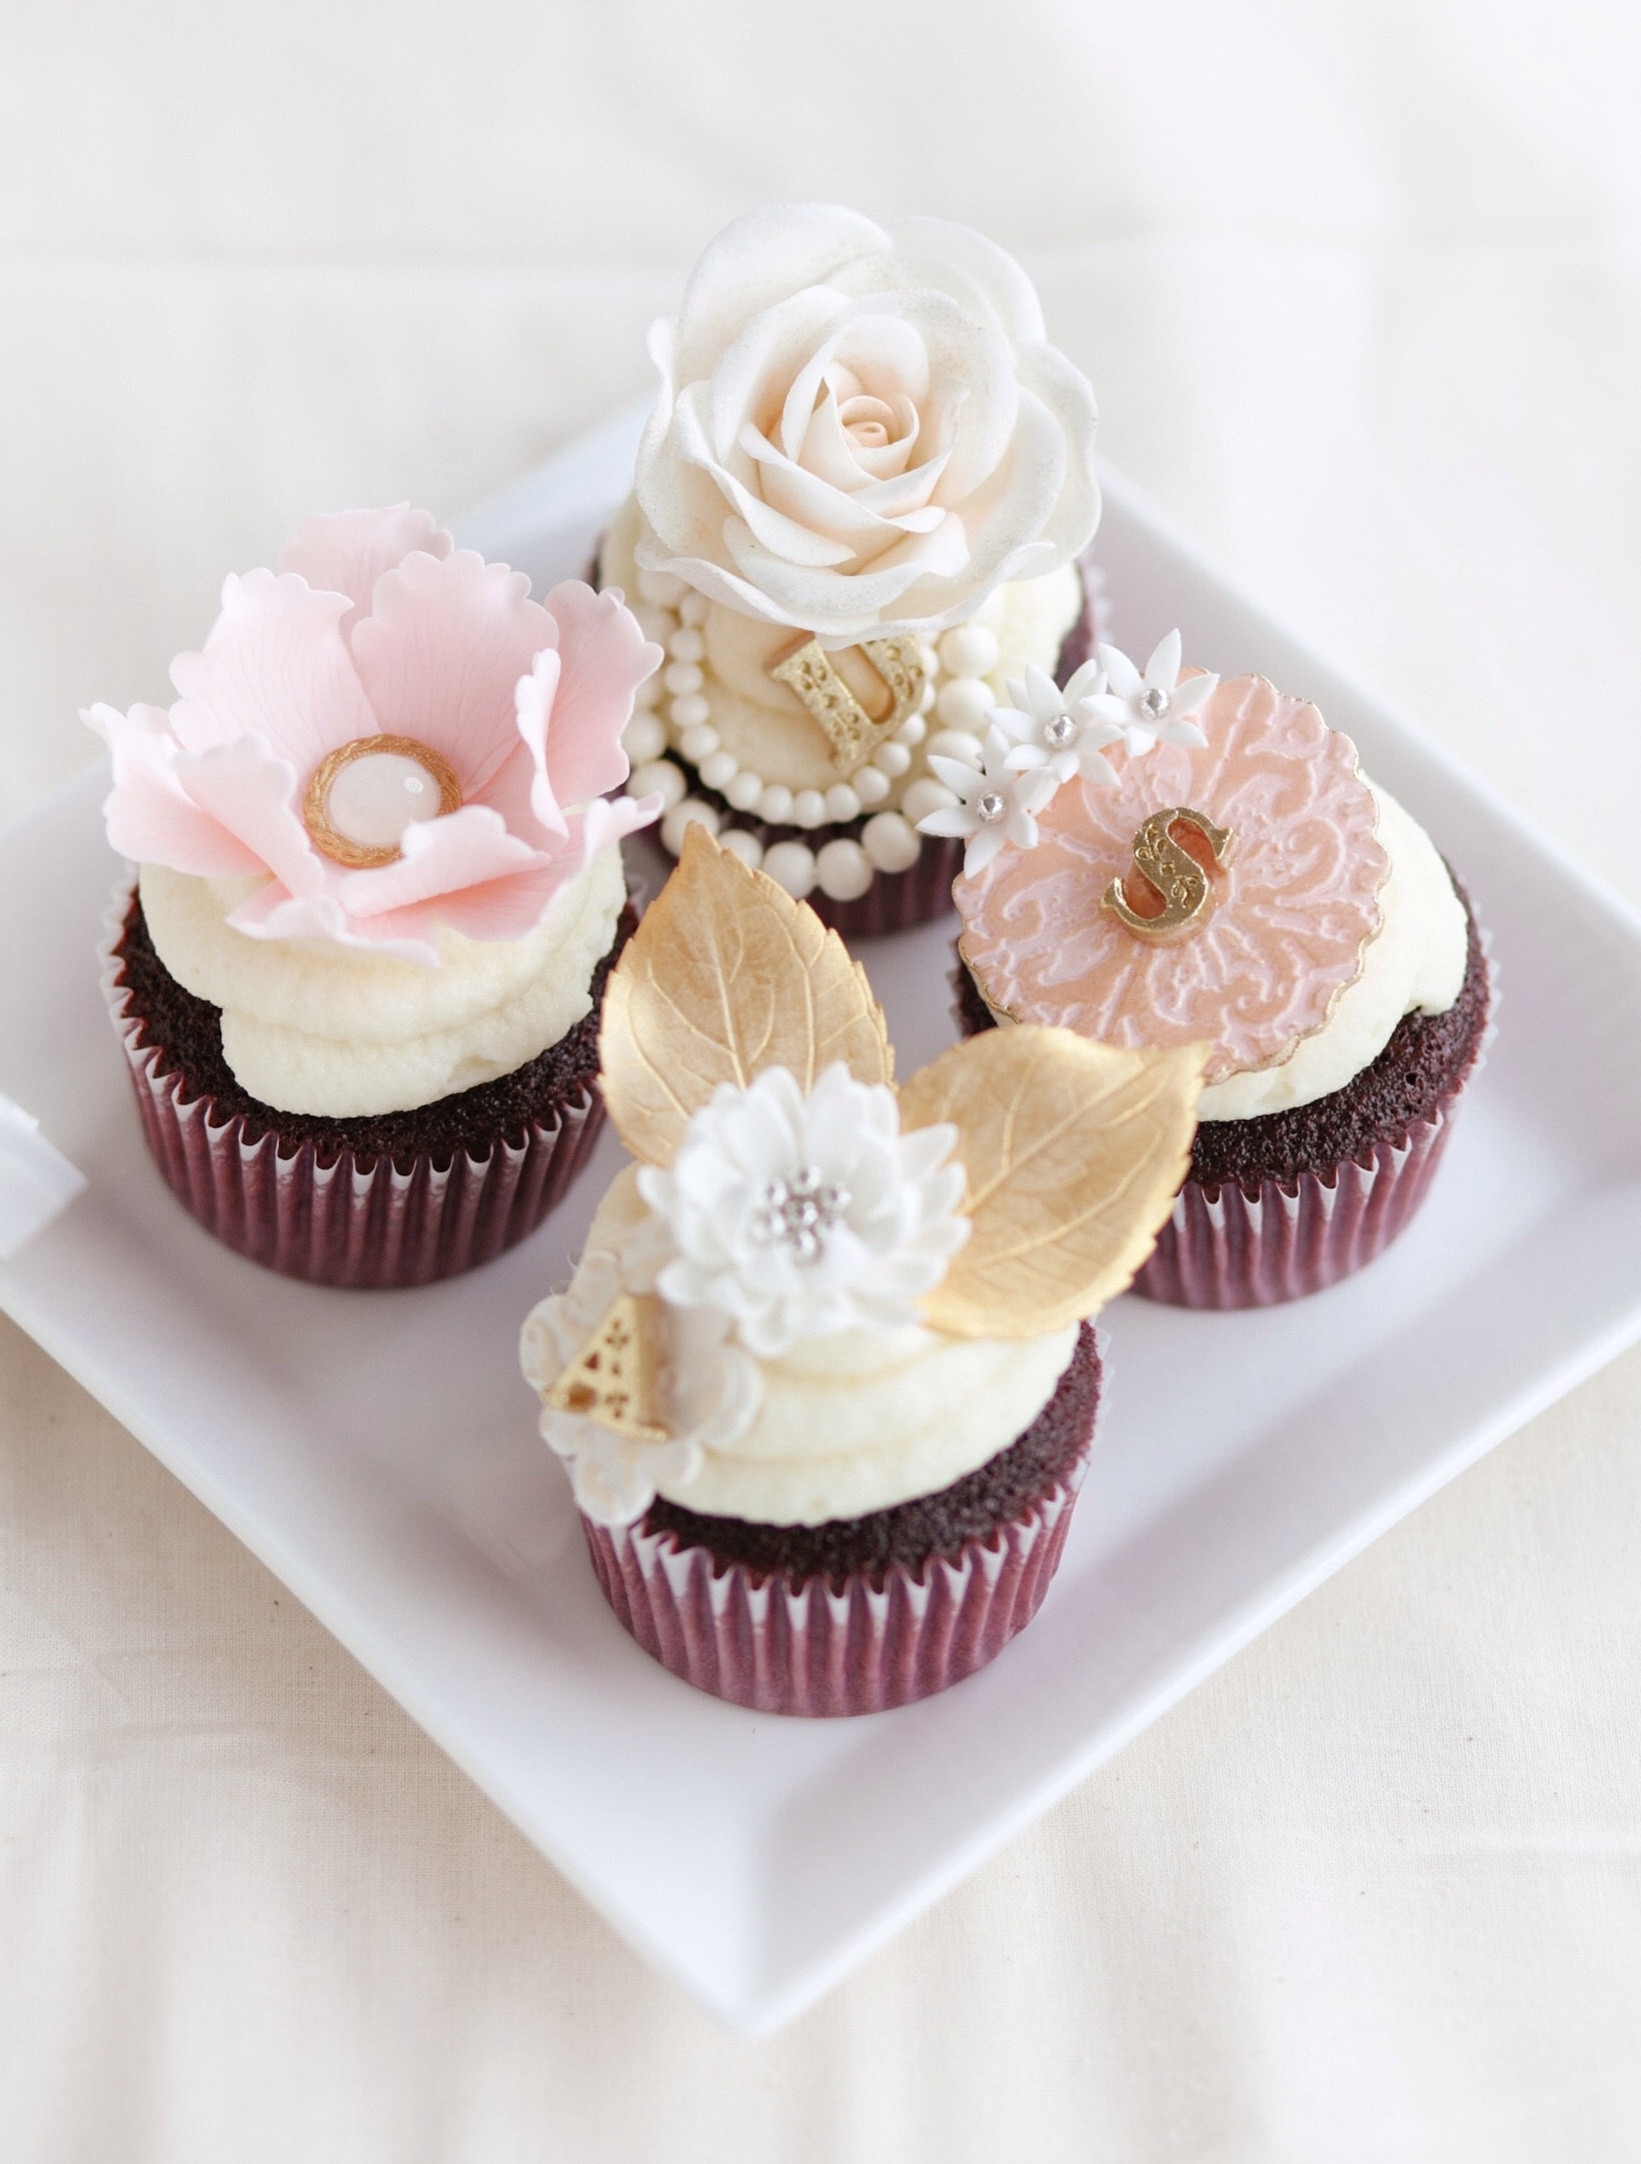 Wedding Shower Cupcakes
 Romantic Pink And Gold Bridal Shower Cupcakes